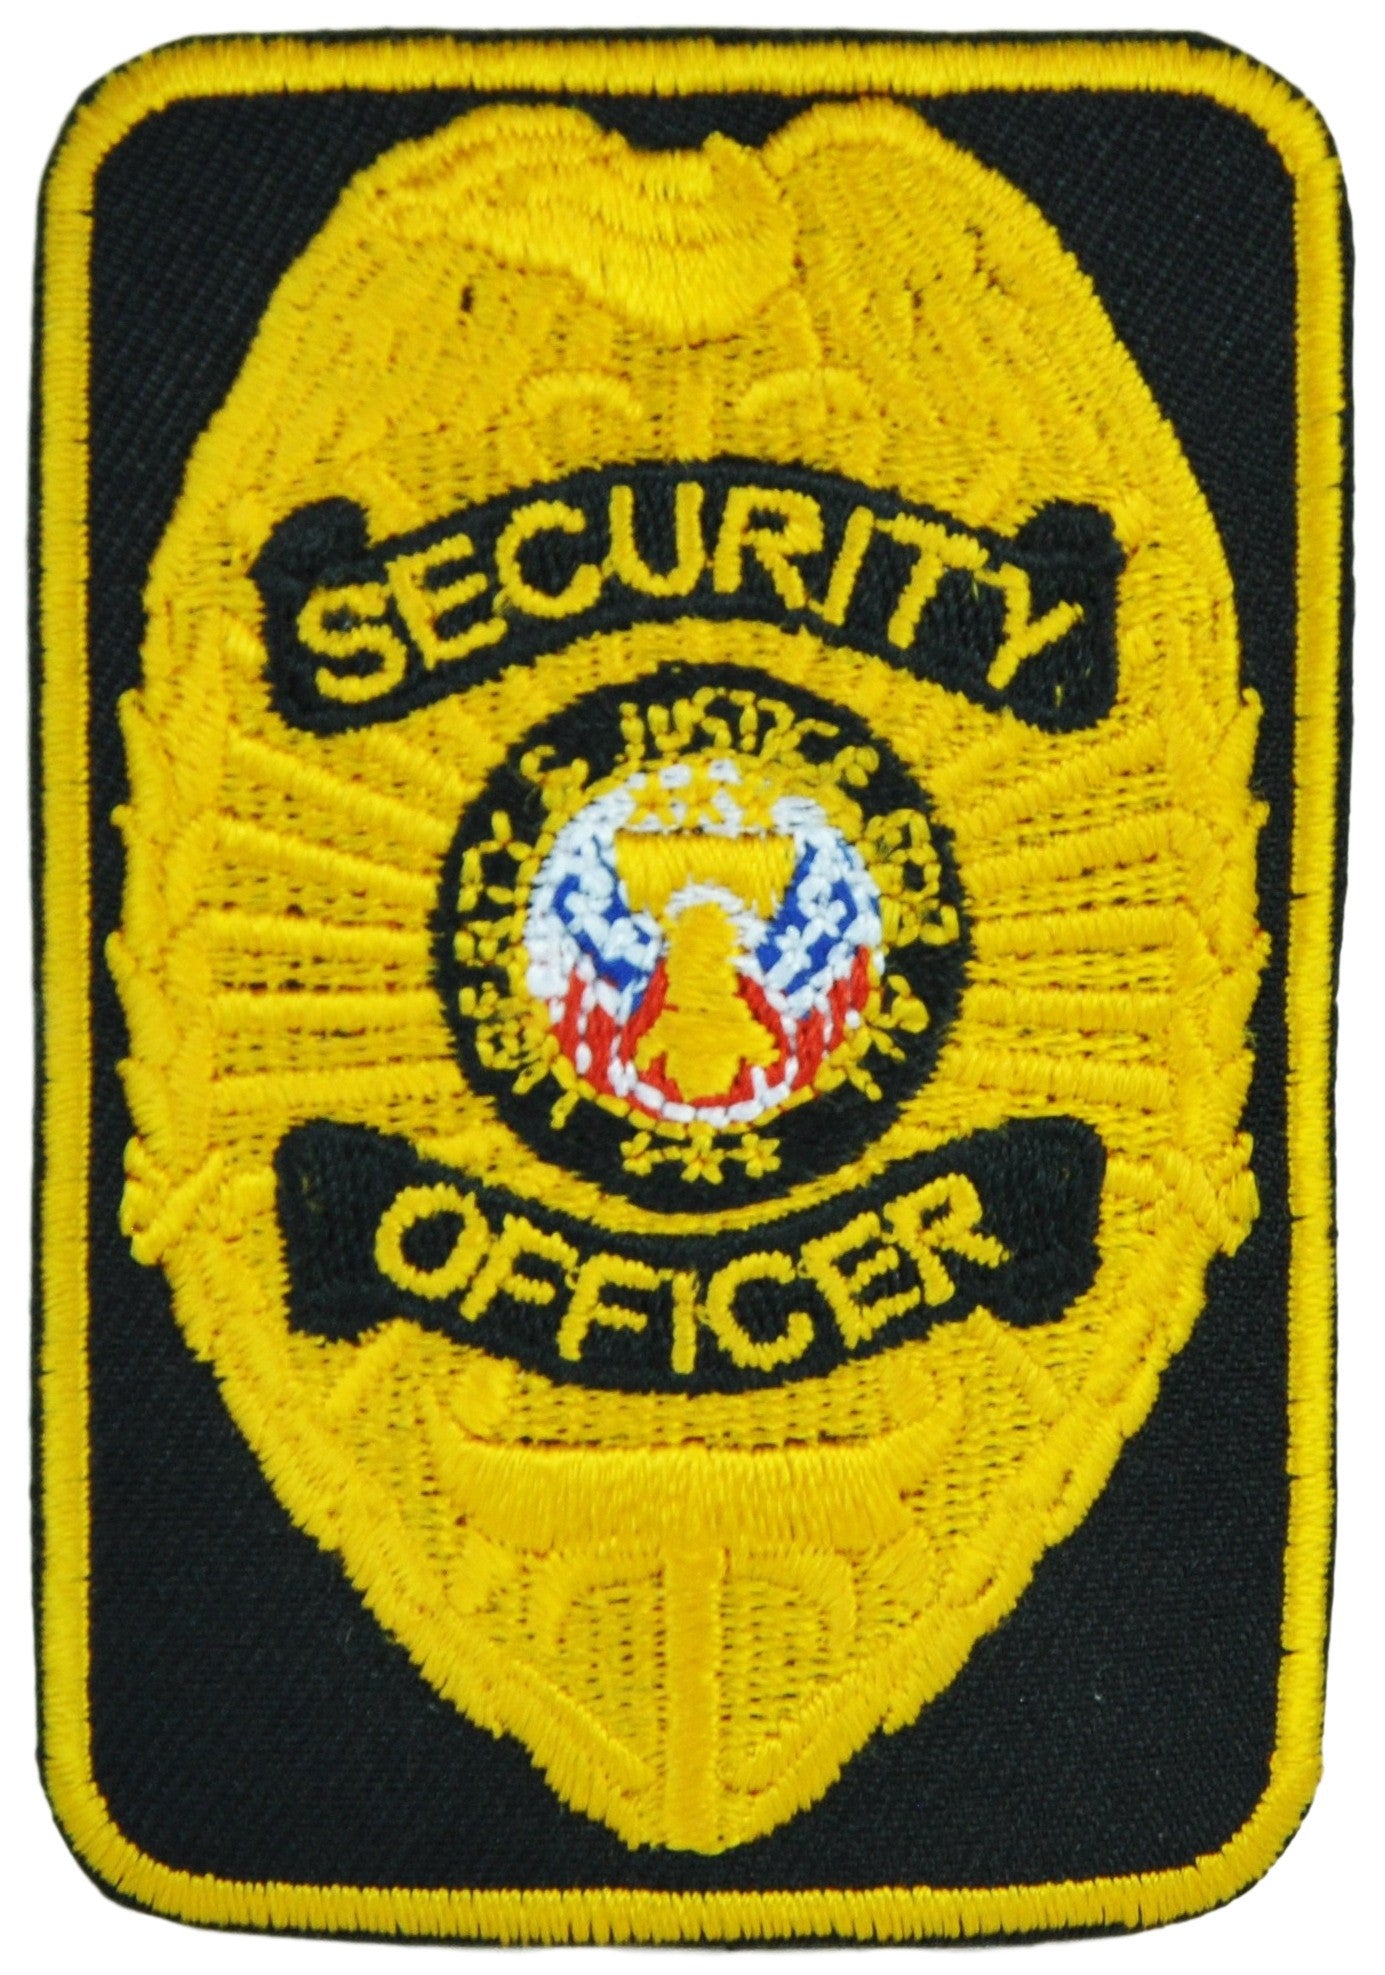 Security Patch in Black And Yellow Oblong Embroidered Patch Badge (A)